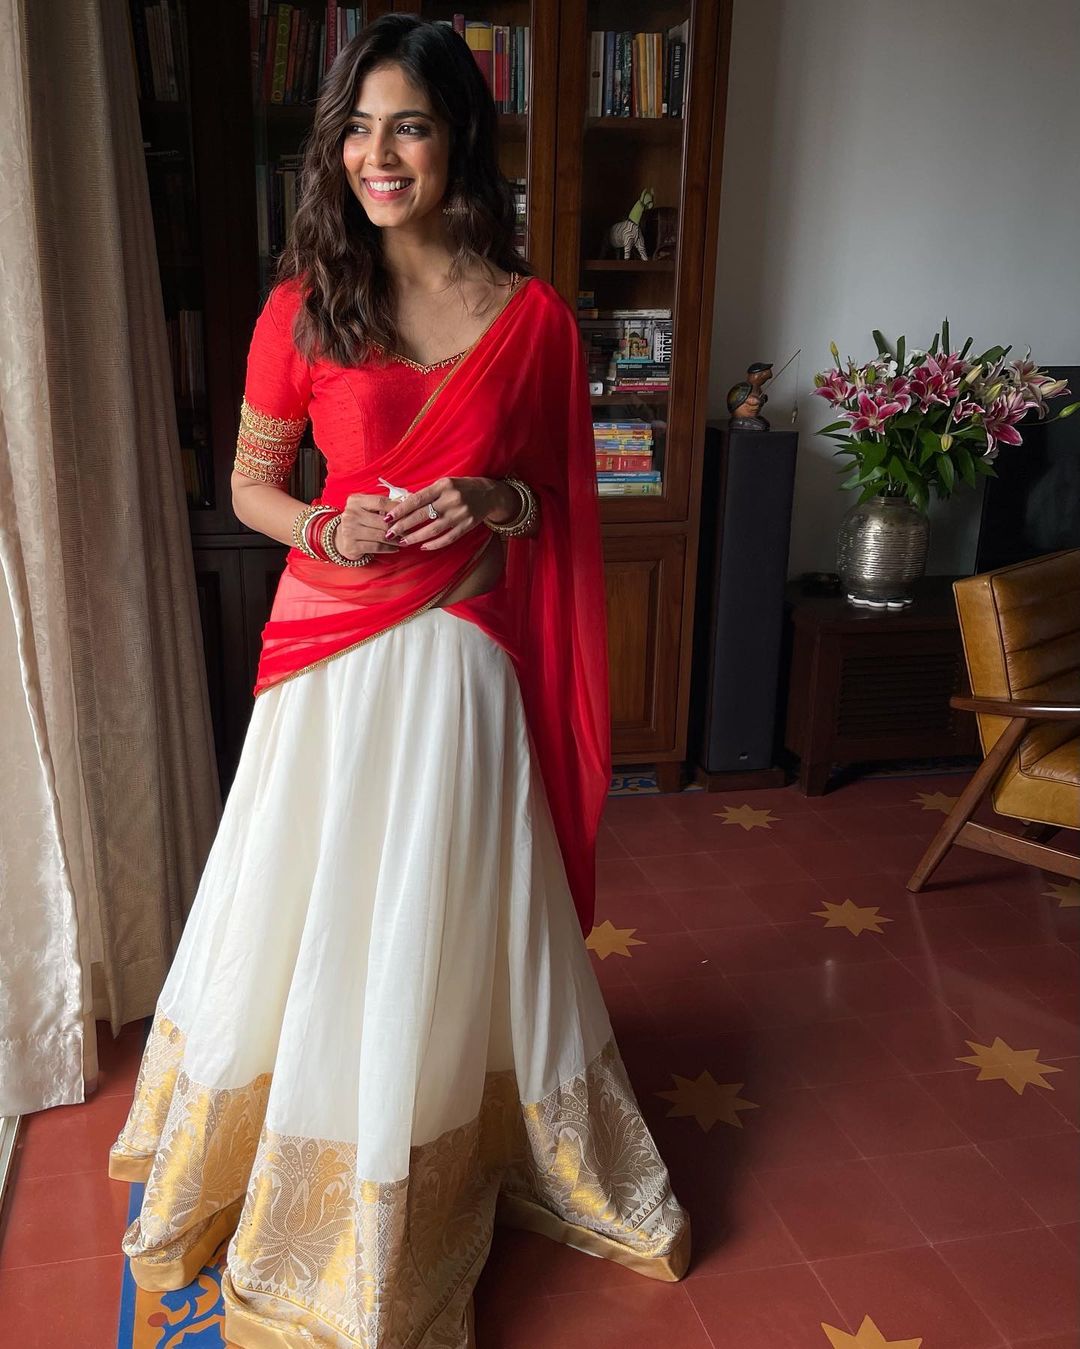 Malavika Mohanan looks gorgeous in the red and white semi-saree.